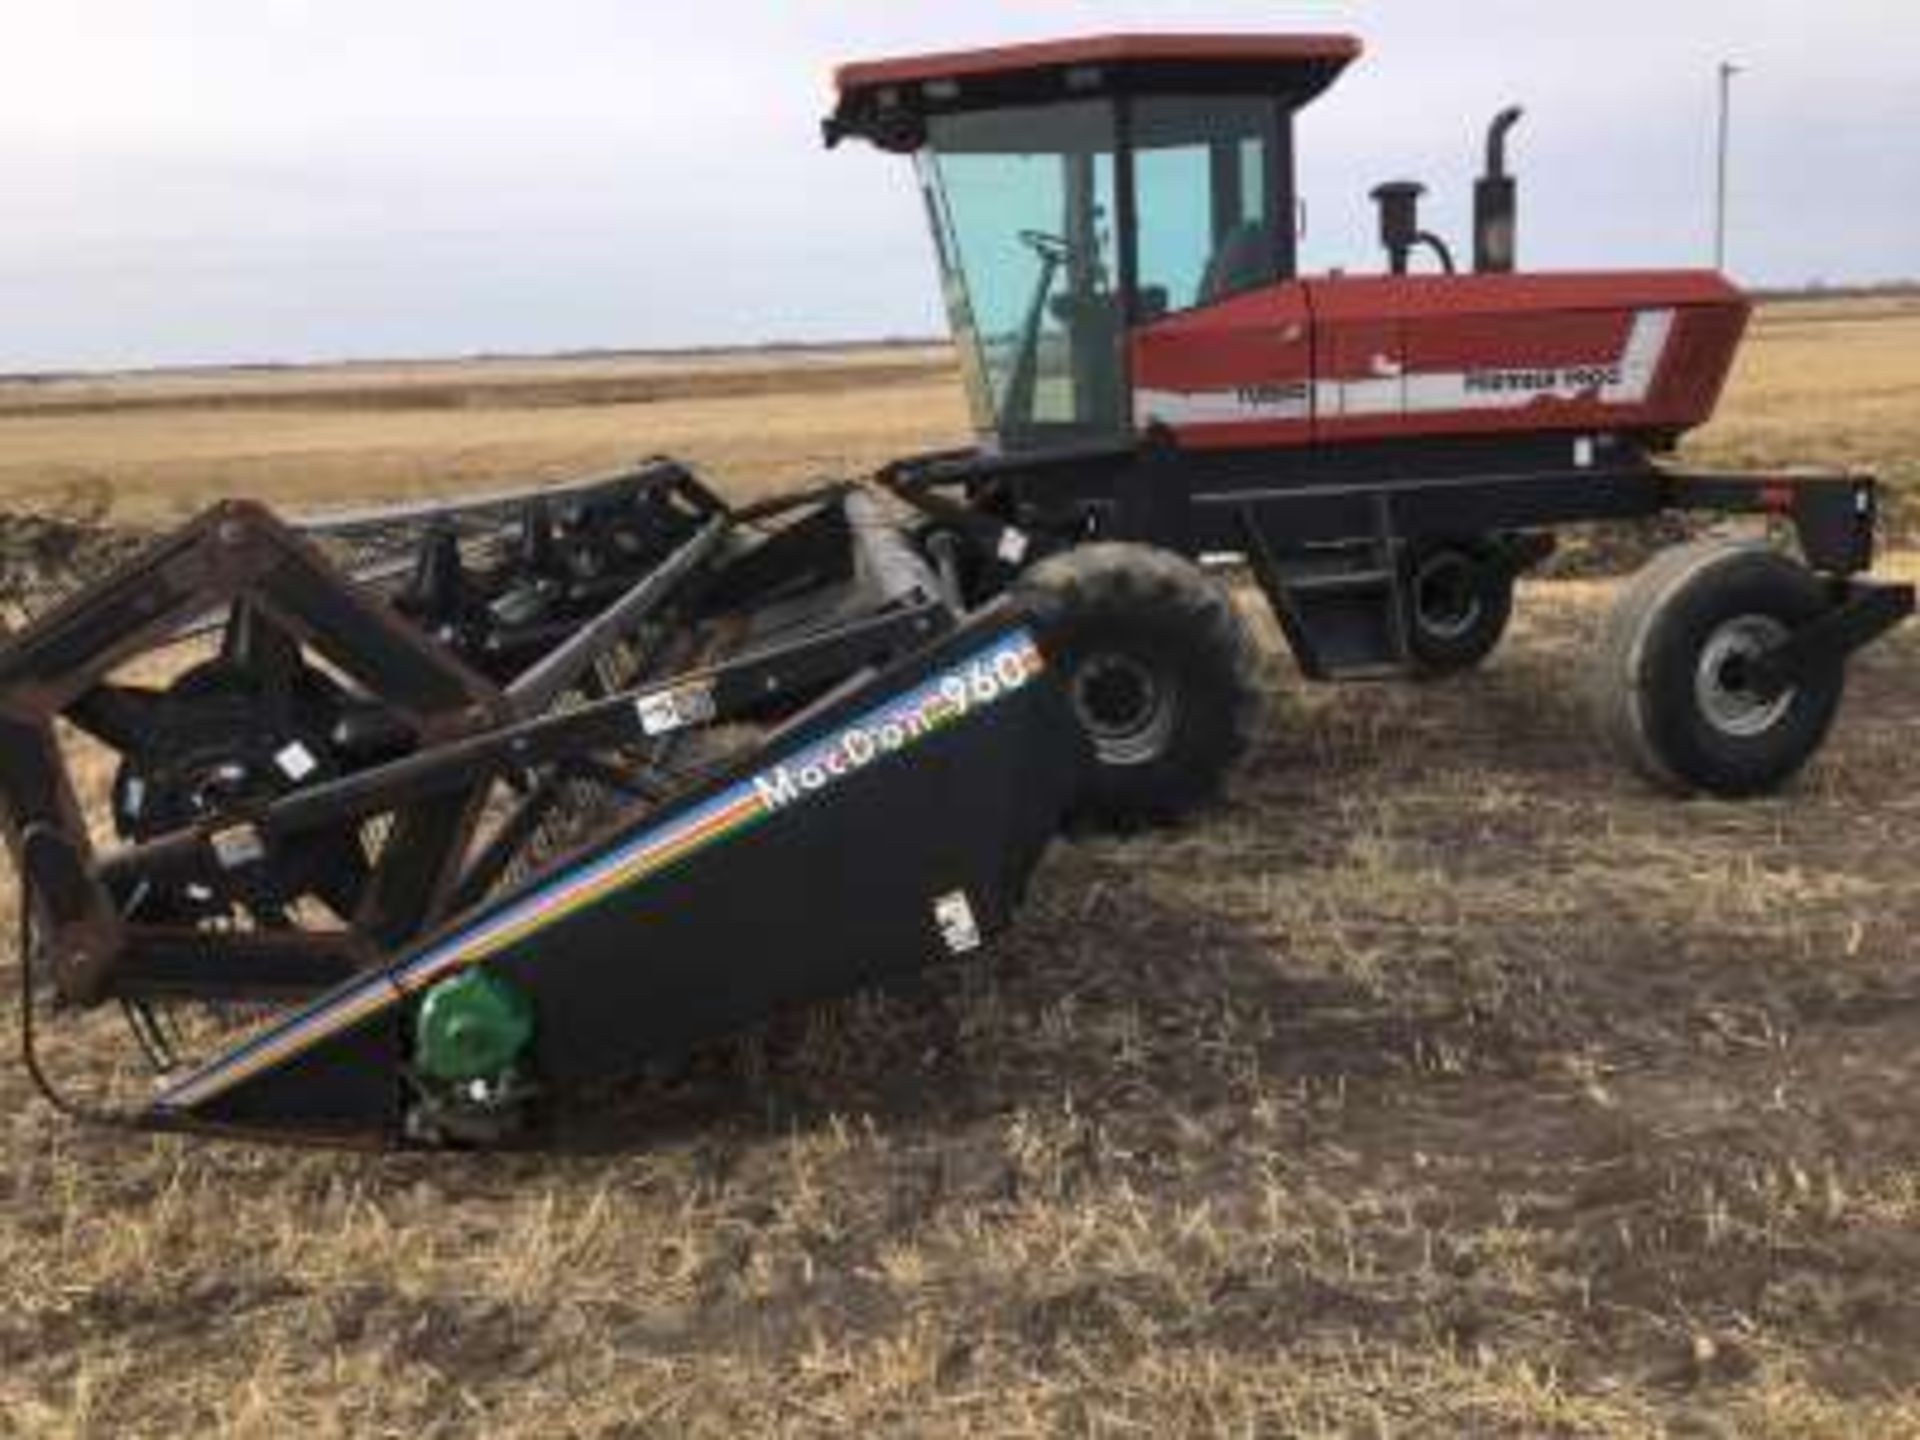 1994 Premier 2900 swather w/30ft Macdon 960 Hdr, less than 500 hrs on totally rebuilt engine, new